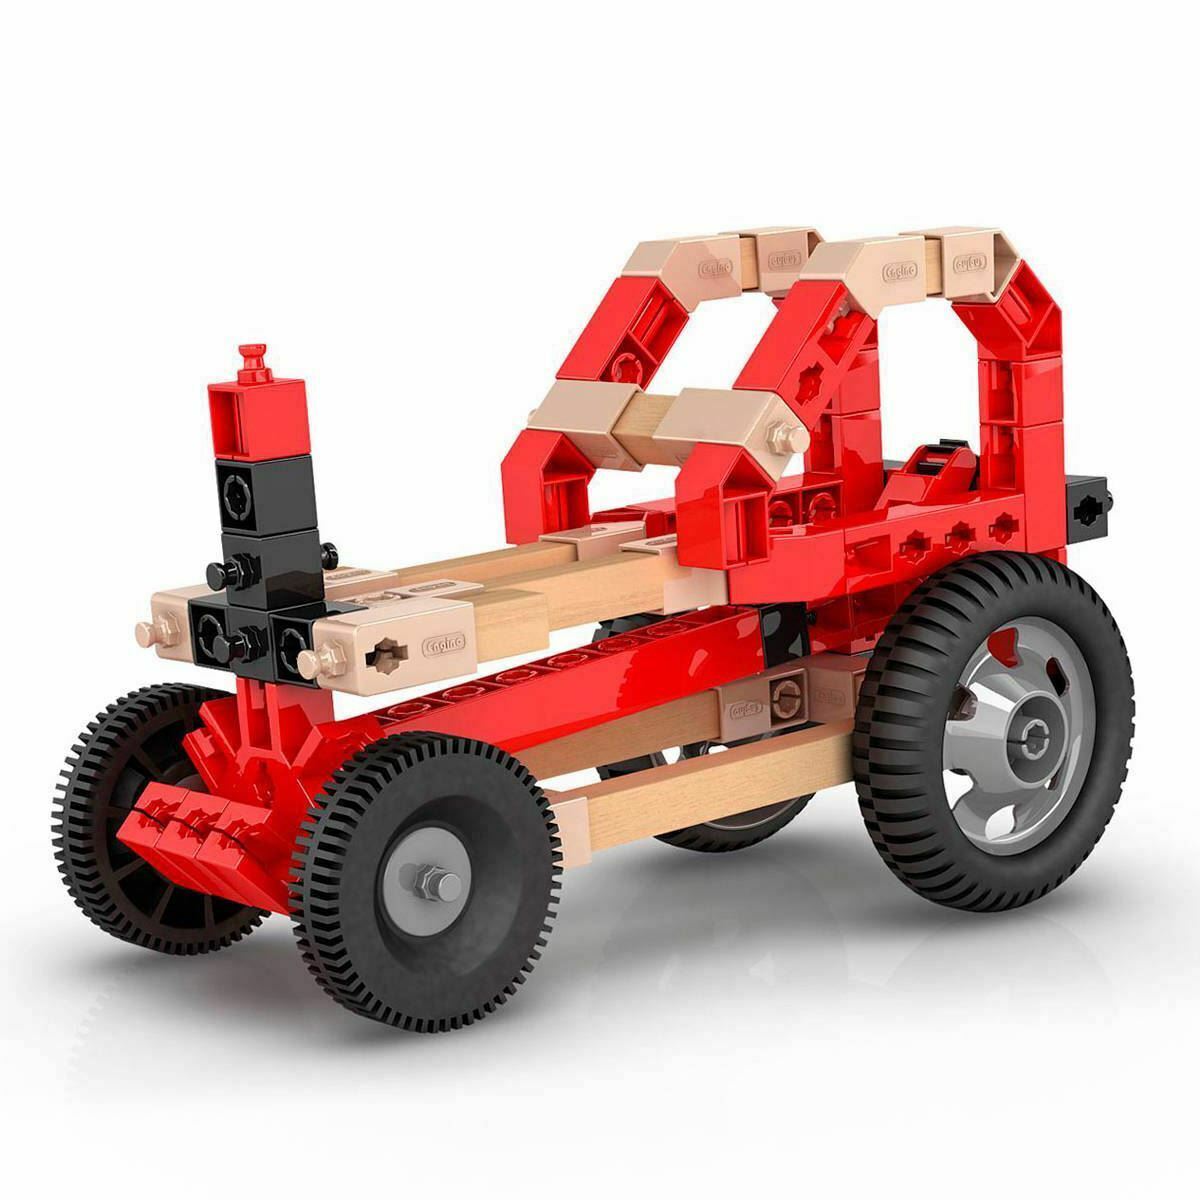 Engino Eco Builds 3 Model Cars Building Construction Creative Official